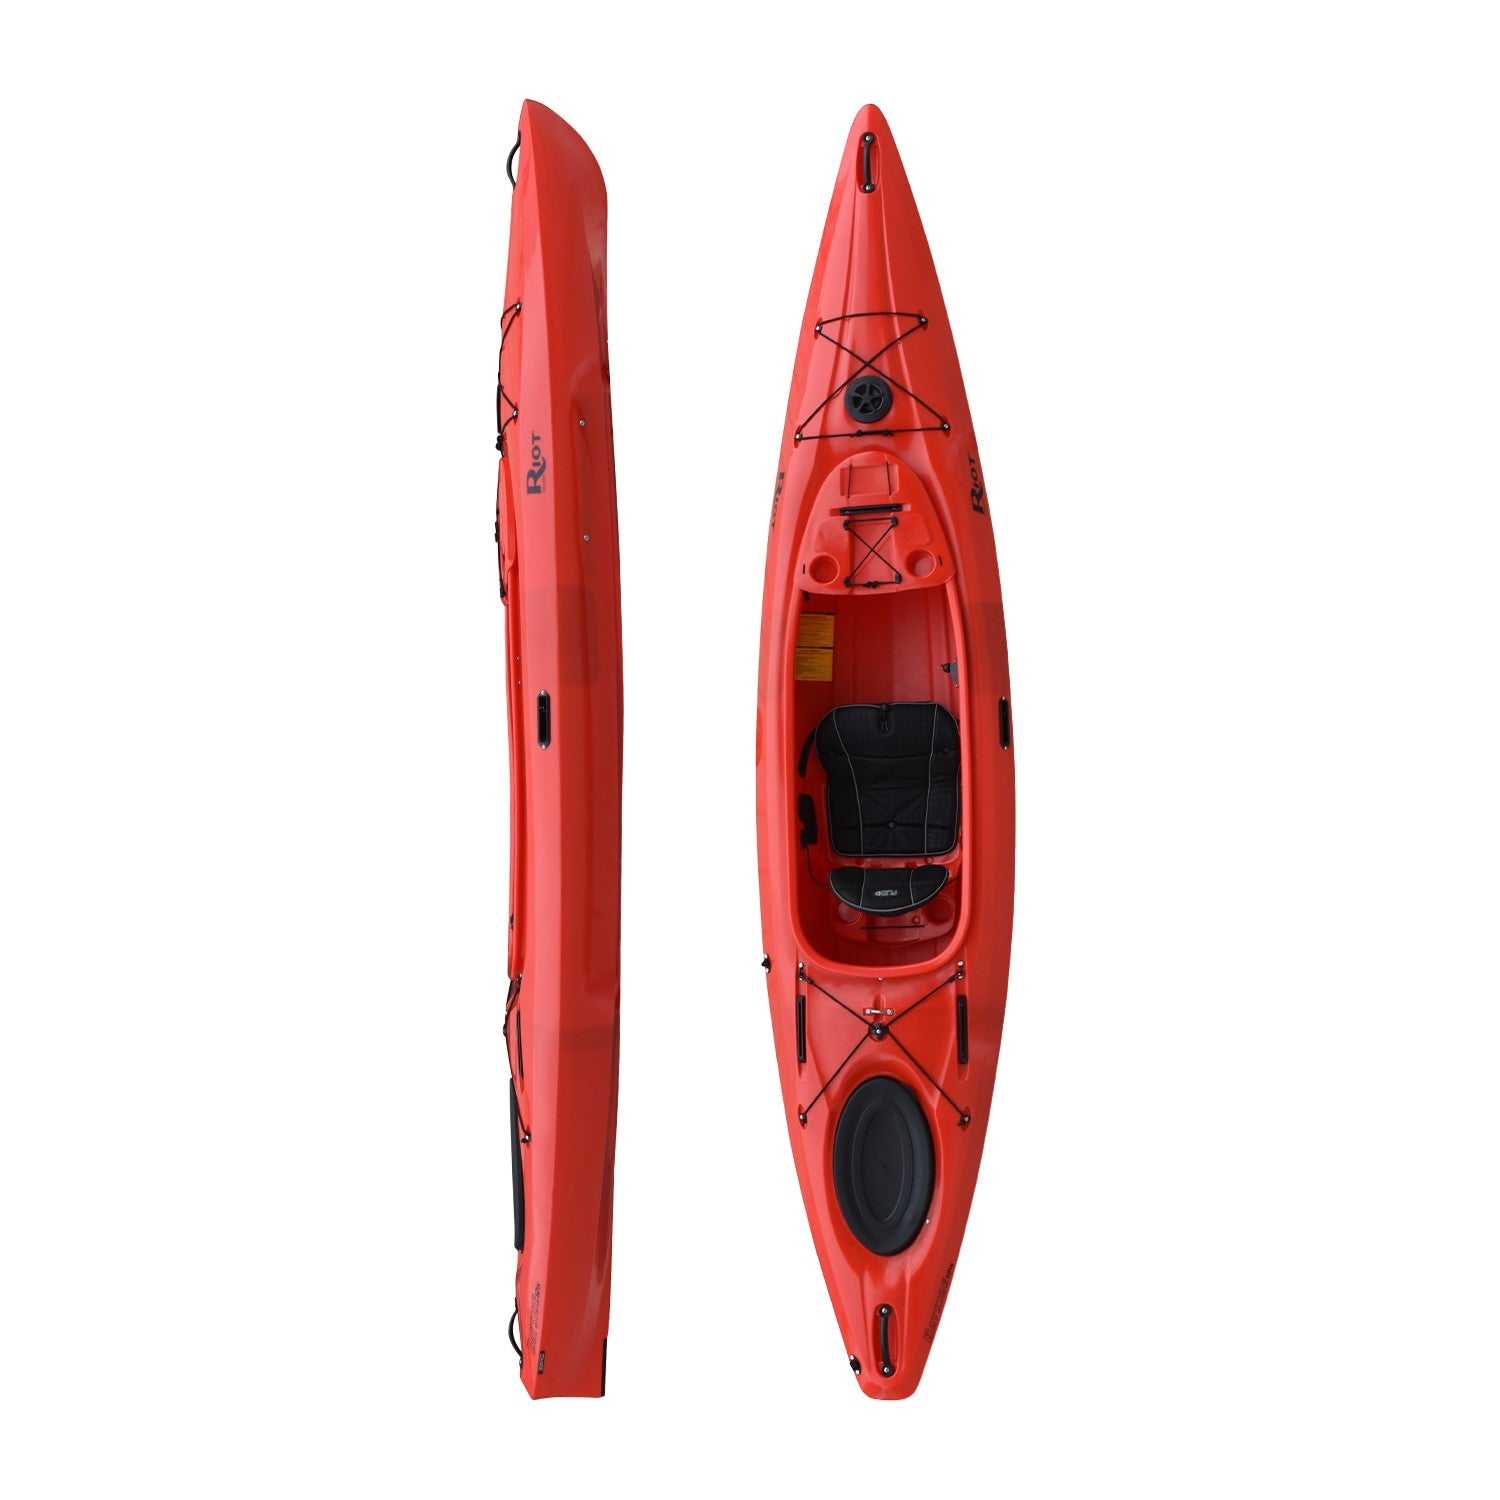 Bayside 12 LV Kayak Red top and side view